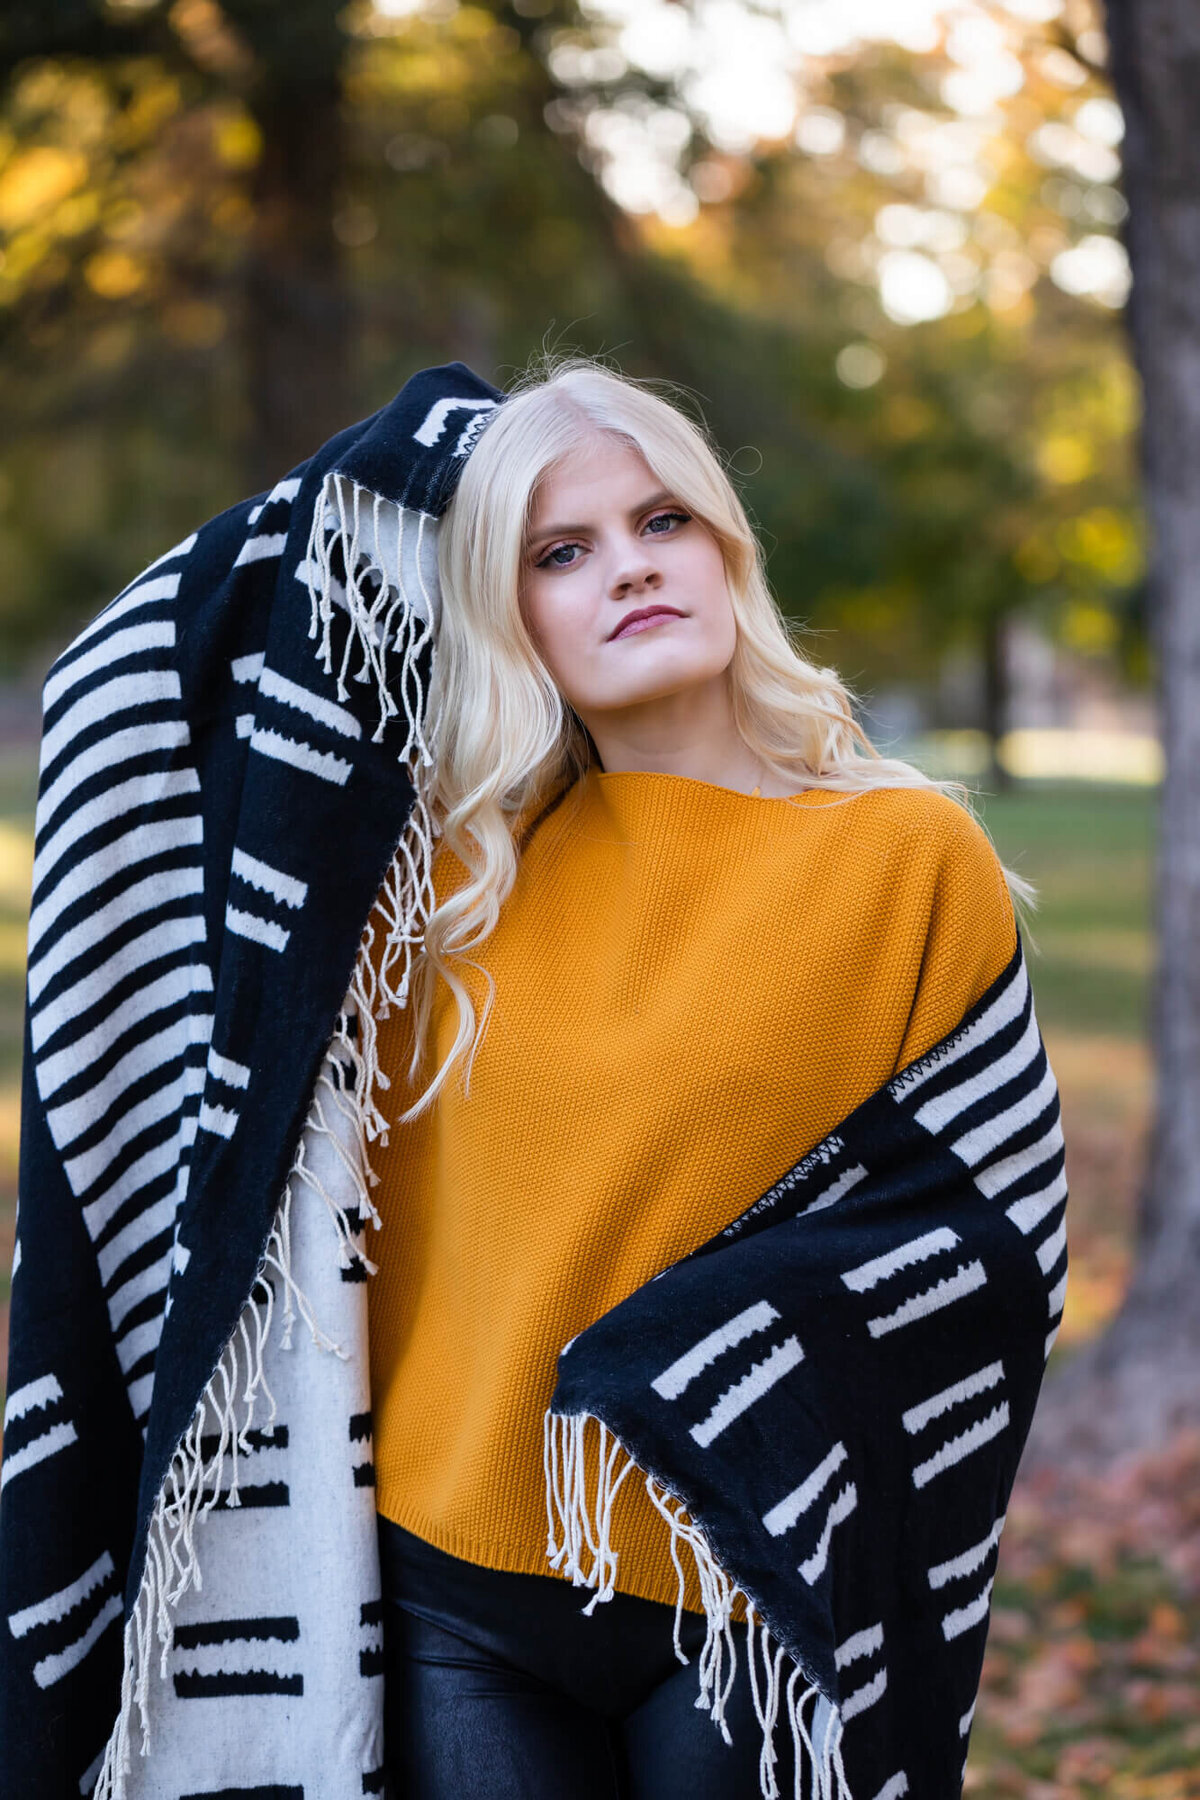 A Fall senior picture of a beautiful blonde teen girl wearing a dark yellow sweater and wrapping herself in a black and white blanket. Captured by Springfield, MO senior photographer Dynae Levingston.